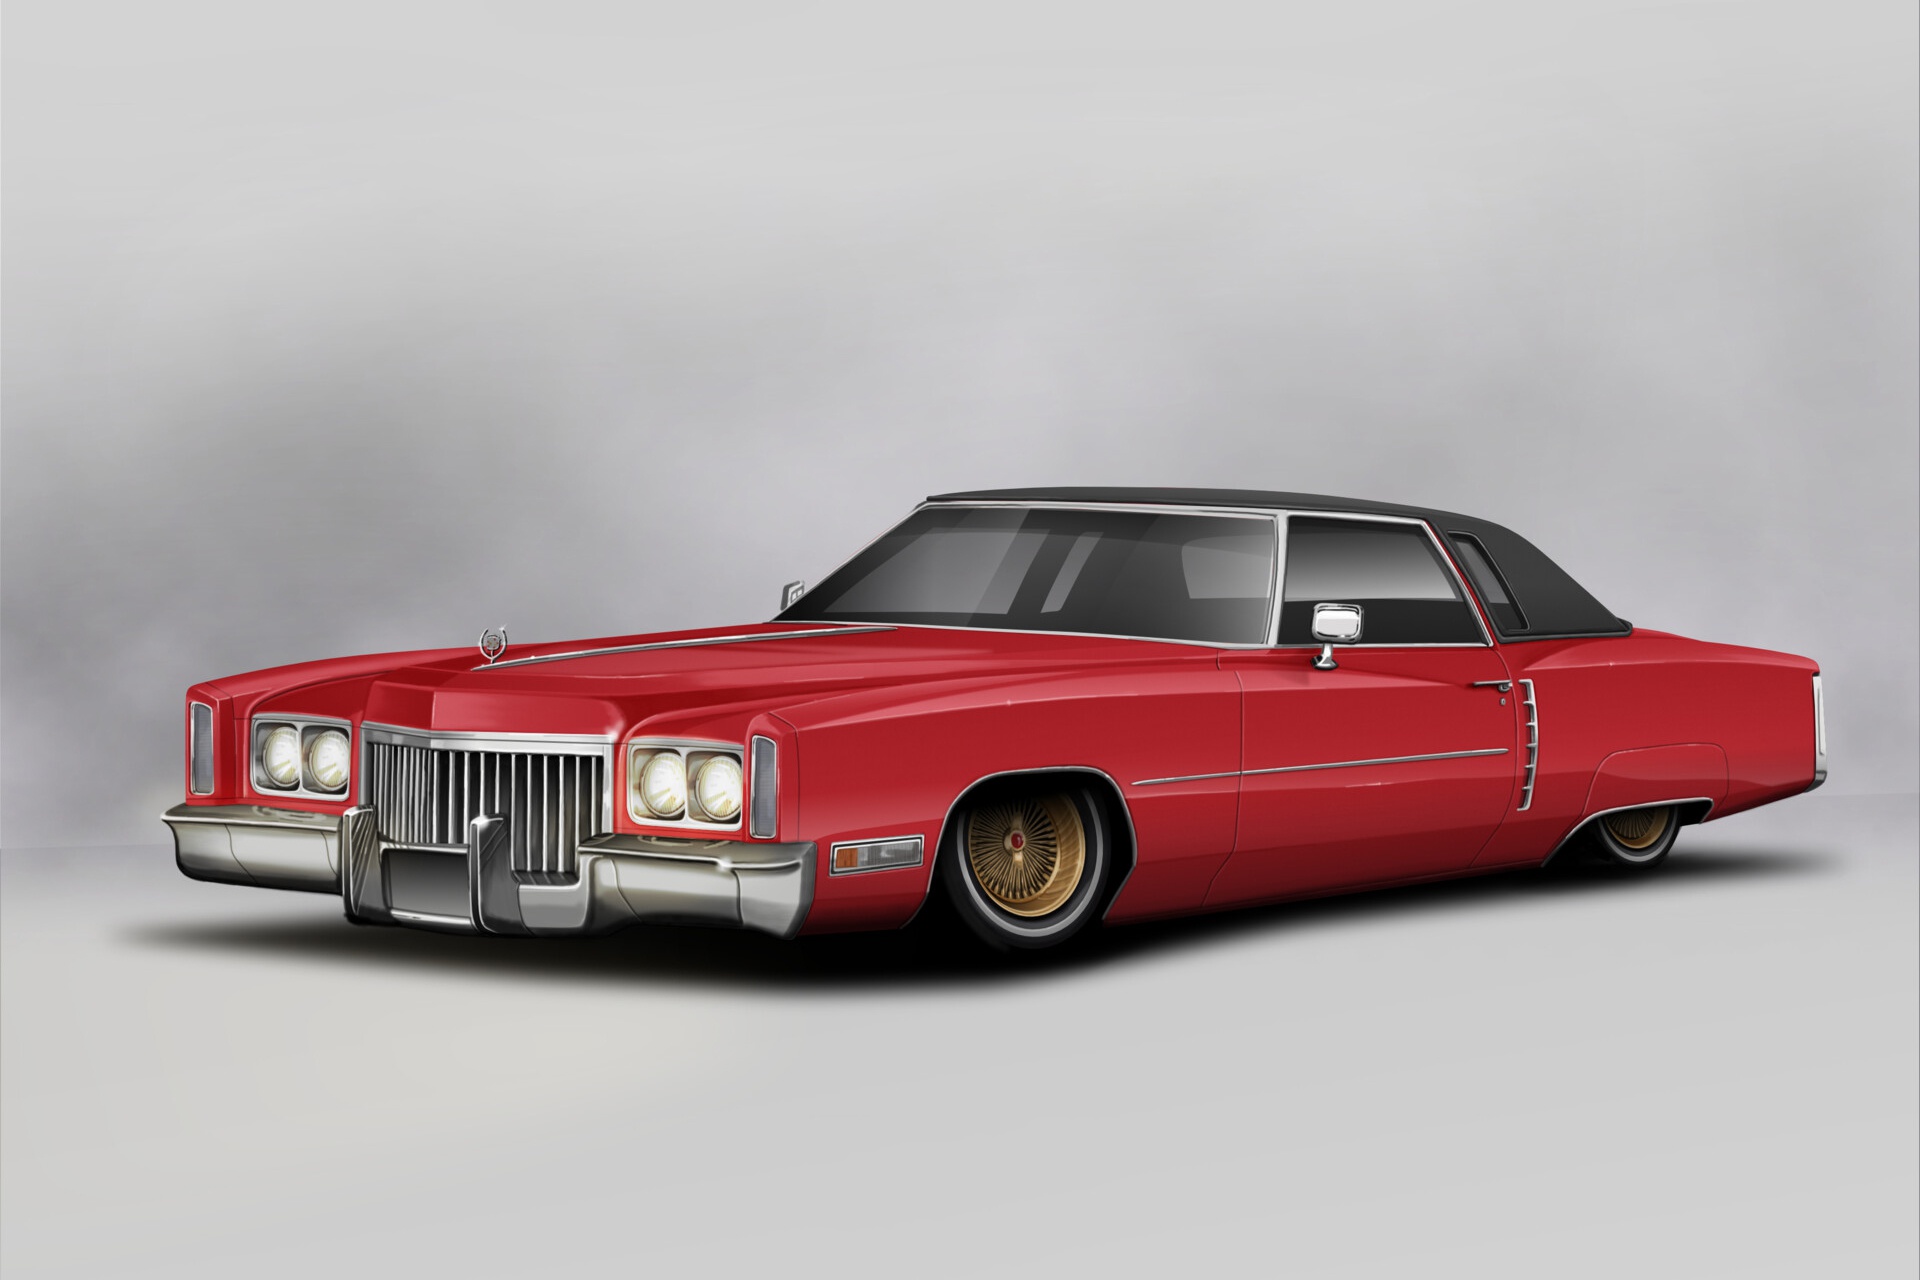 General 1920x1280 simple background car red cars artwork Cadillac American cars